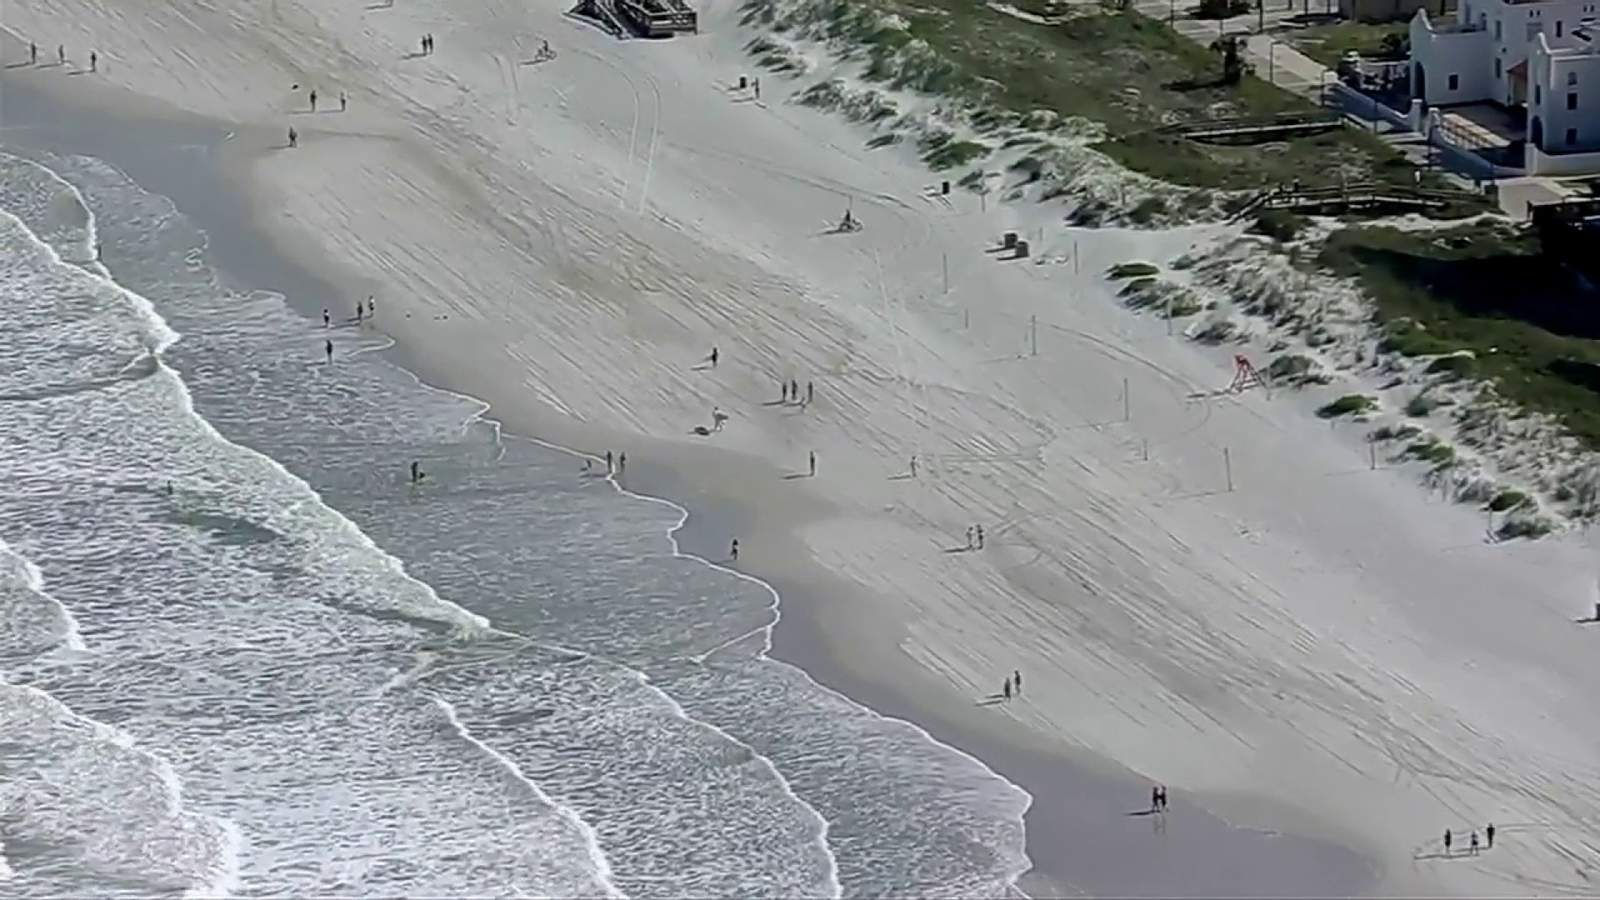 Jacksonville beaches open during coronavirus so what about South Florida?